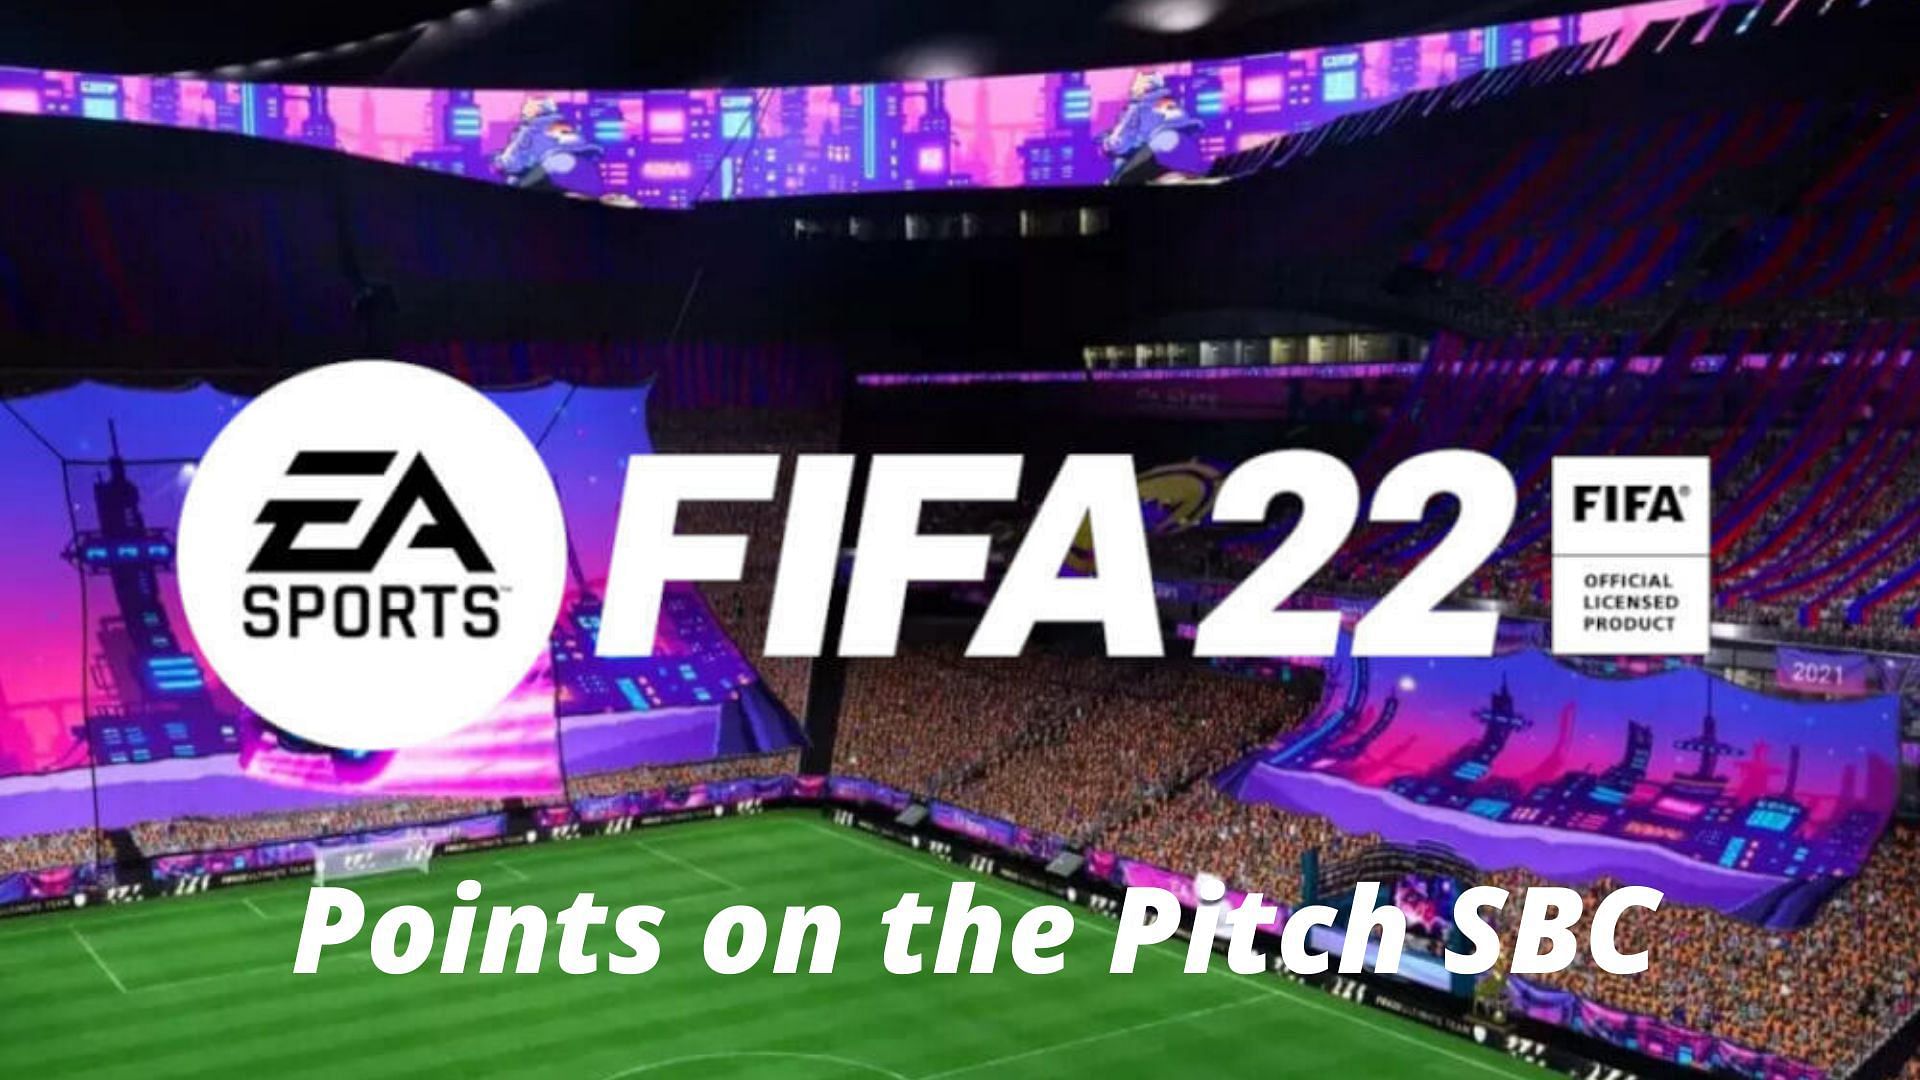 Points on the Pitch SBC is live on FIFA 22 Ultimate Team (Image via Sportskeeda)